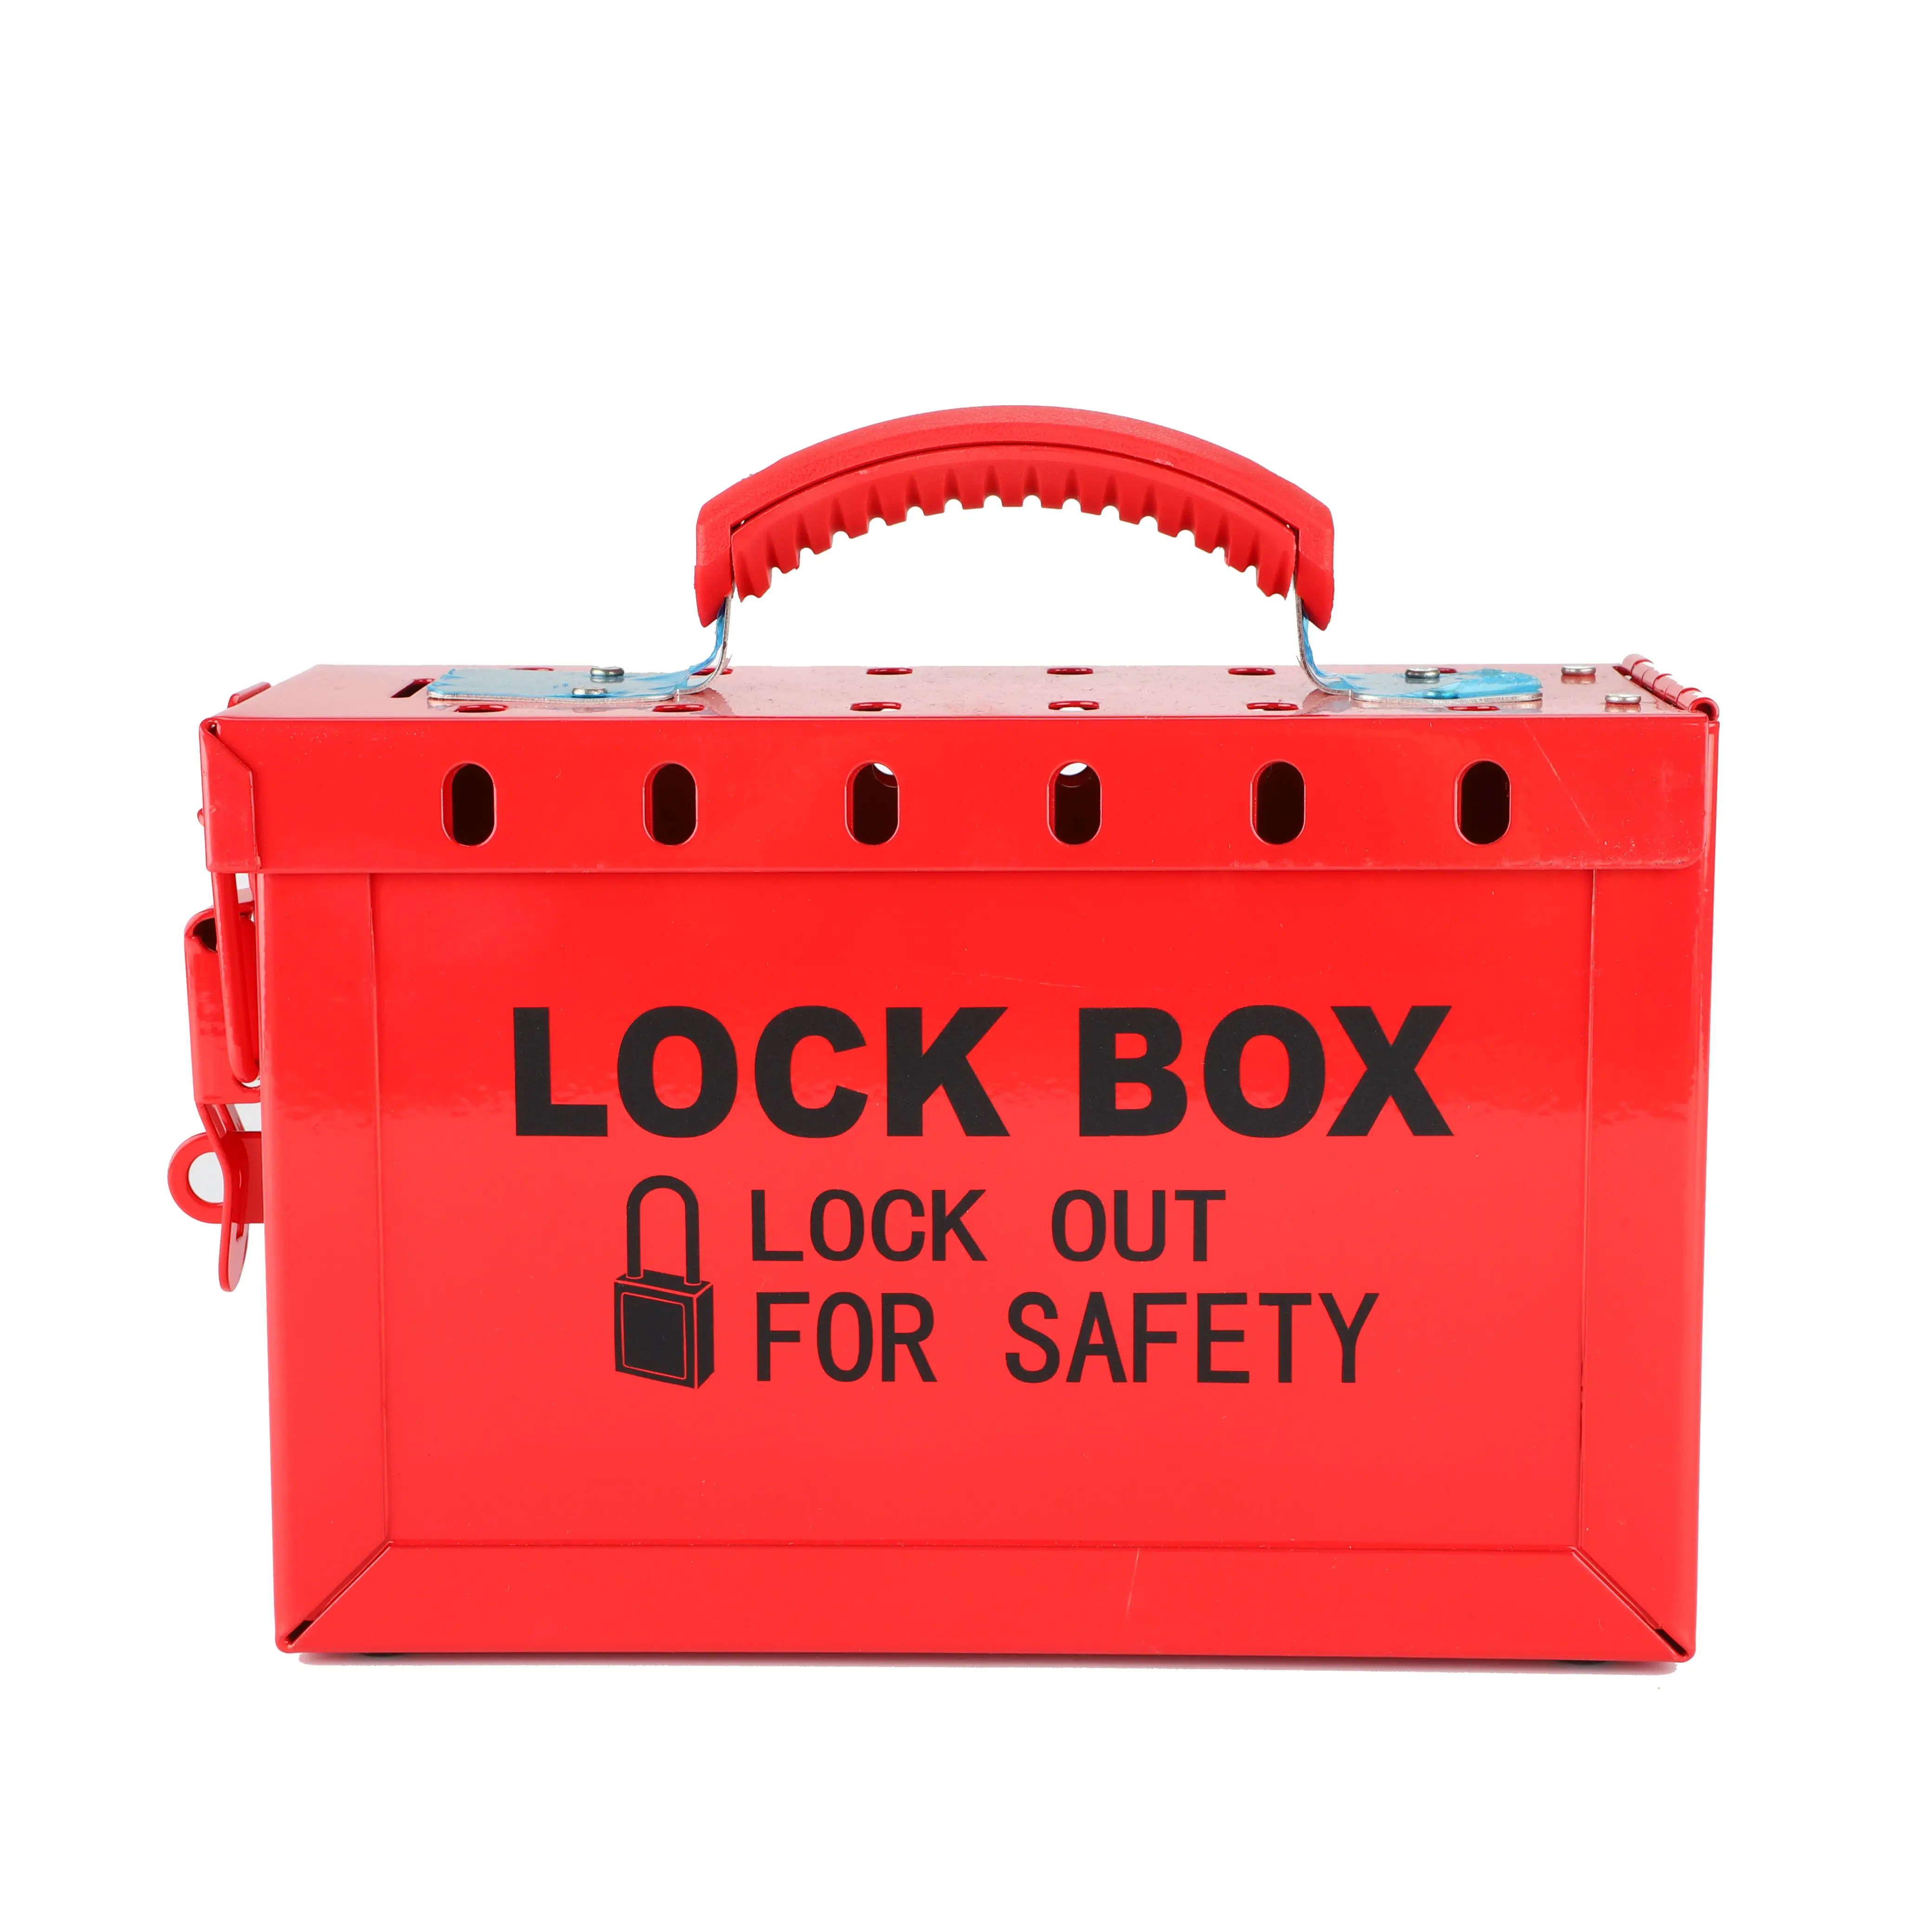 12 padlocks Portable Metal Steel loto safety lock Group Lockout Boxe with keyhole slot